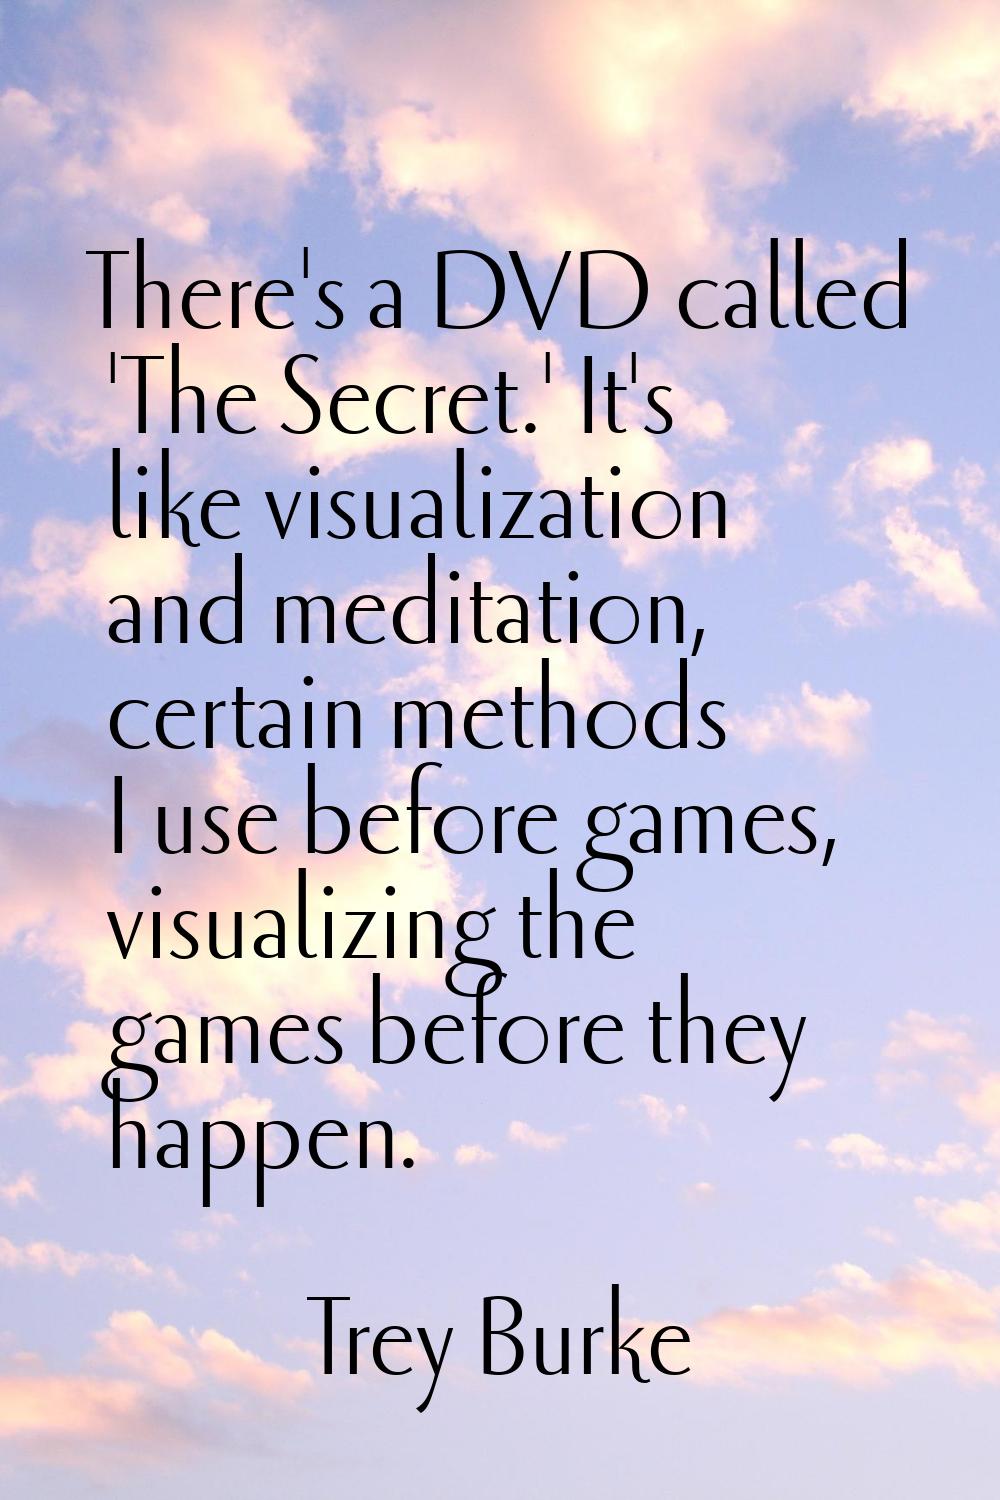 There's a DVD called 'The Secret.' It's like visualization and meditation, certain methods I use be